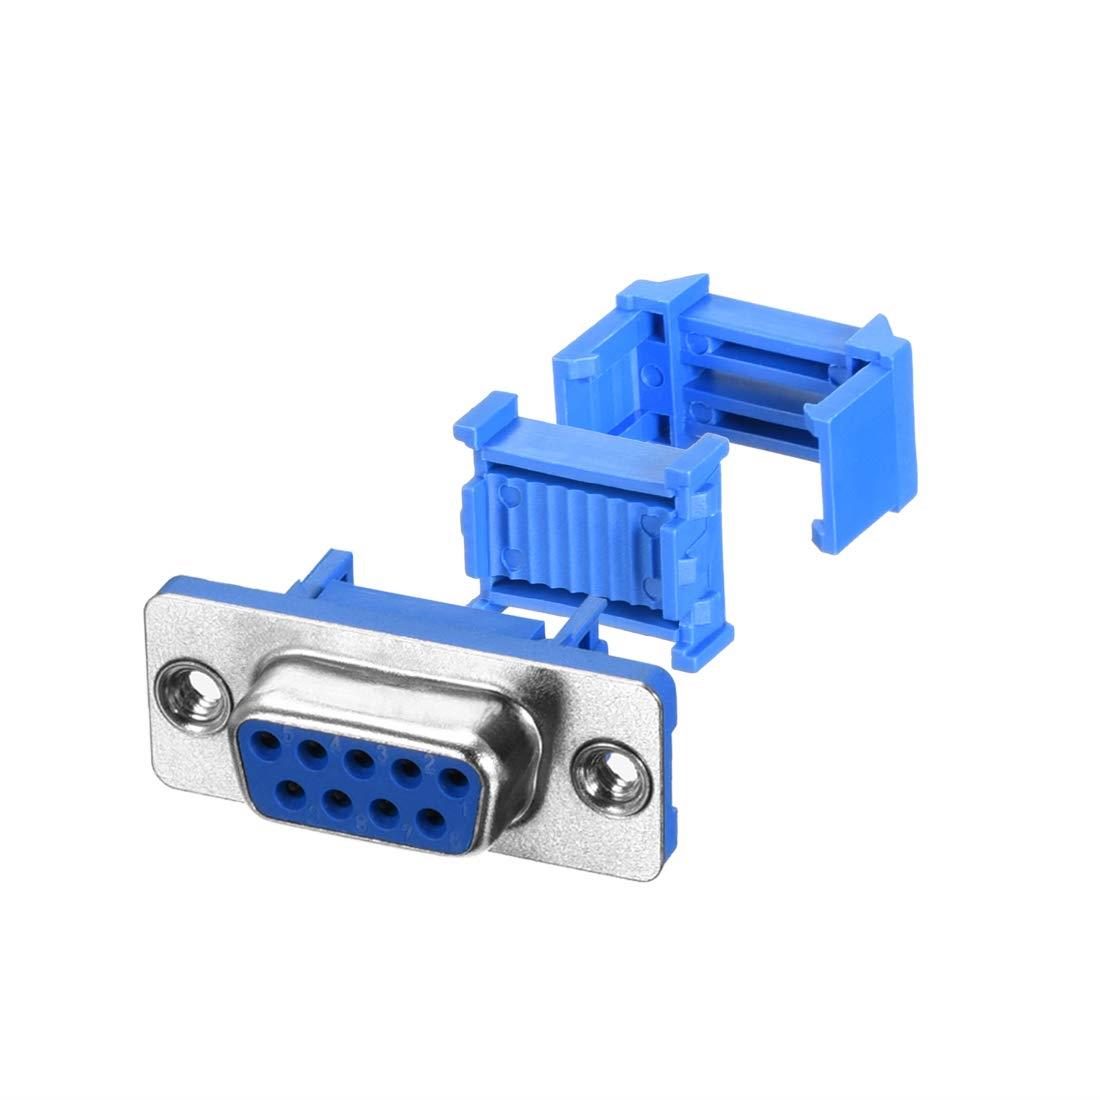 DB9 Female IDC Type Crimp Connector for Flat Cable [2pcs Pack]